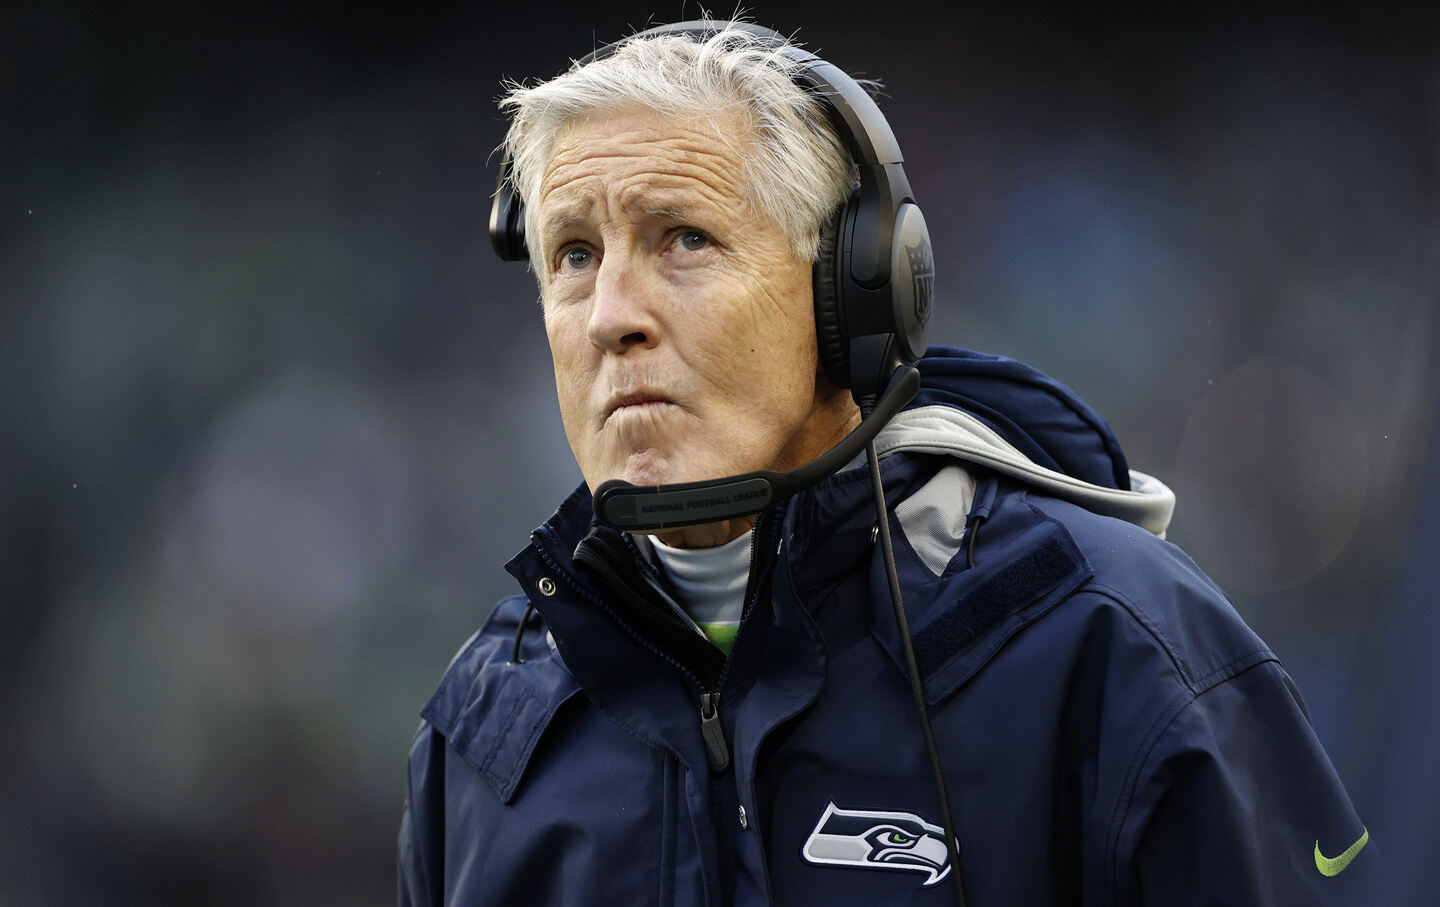 Pete Carroll's Magic Shoes and Brittney Griner's Freedom